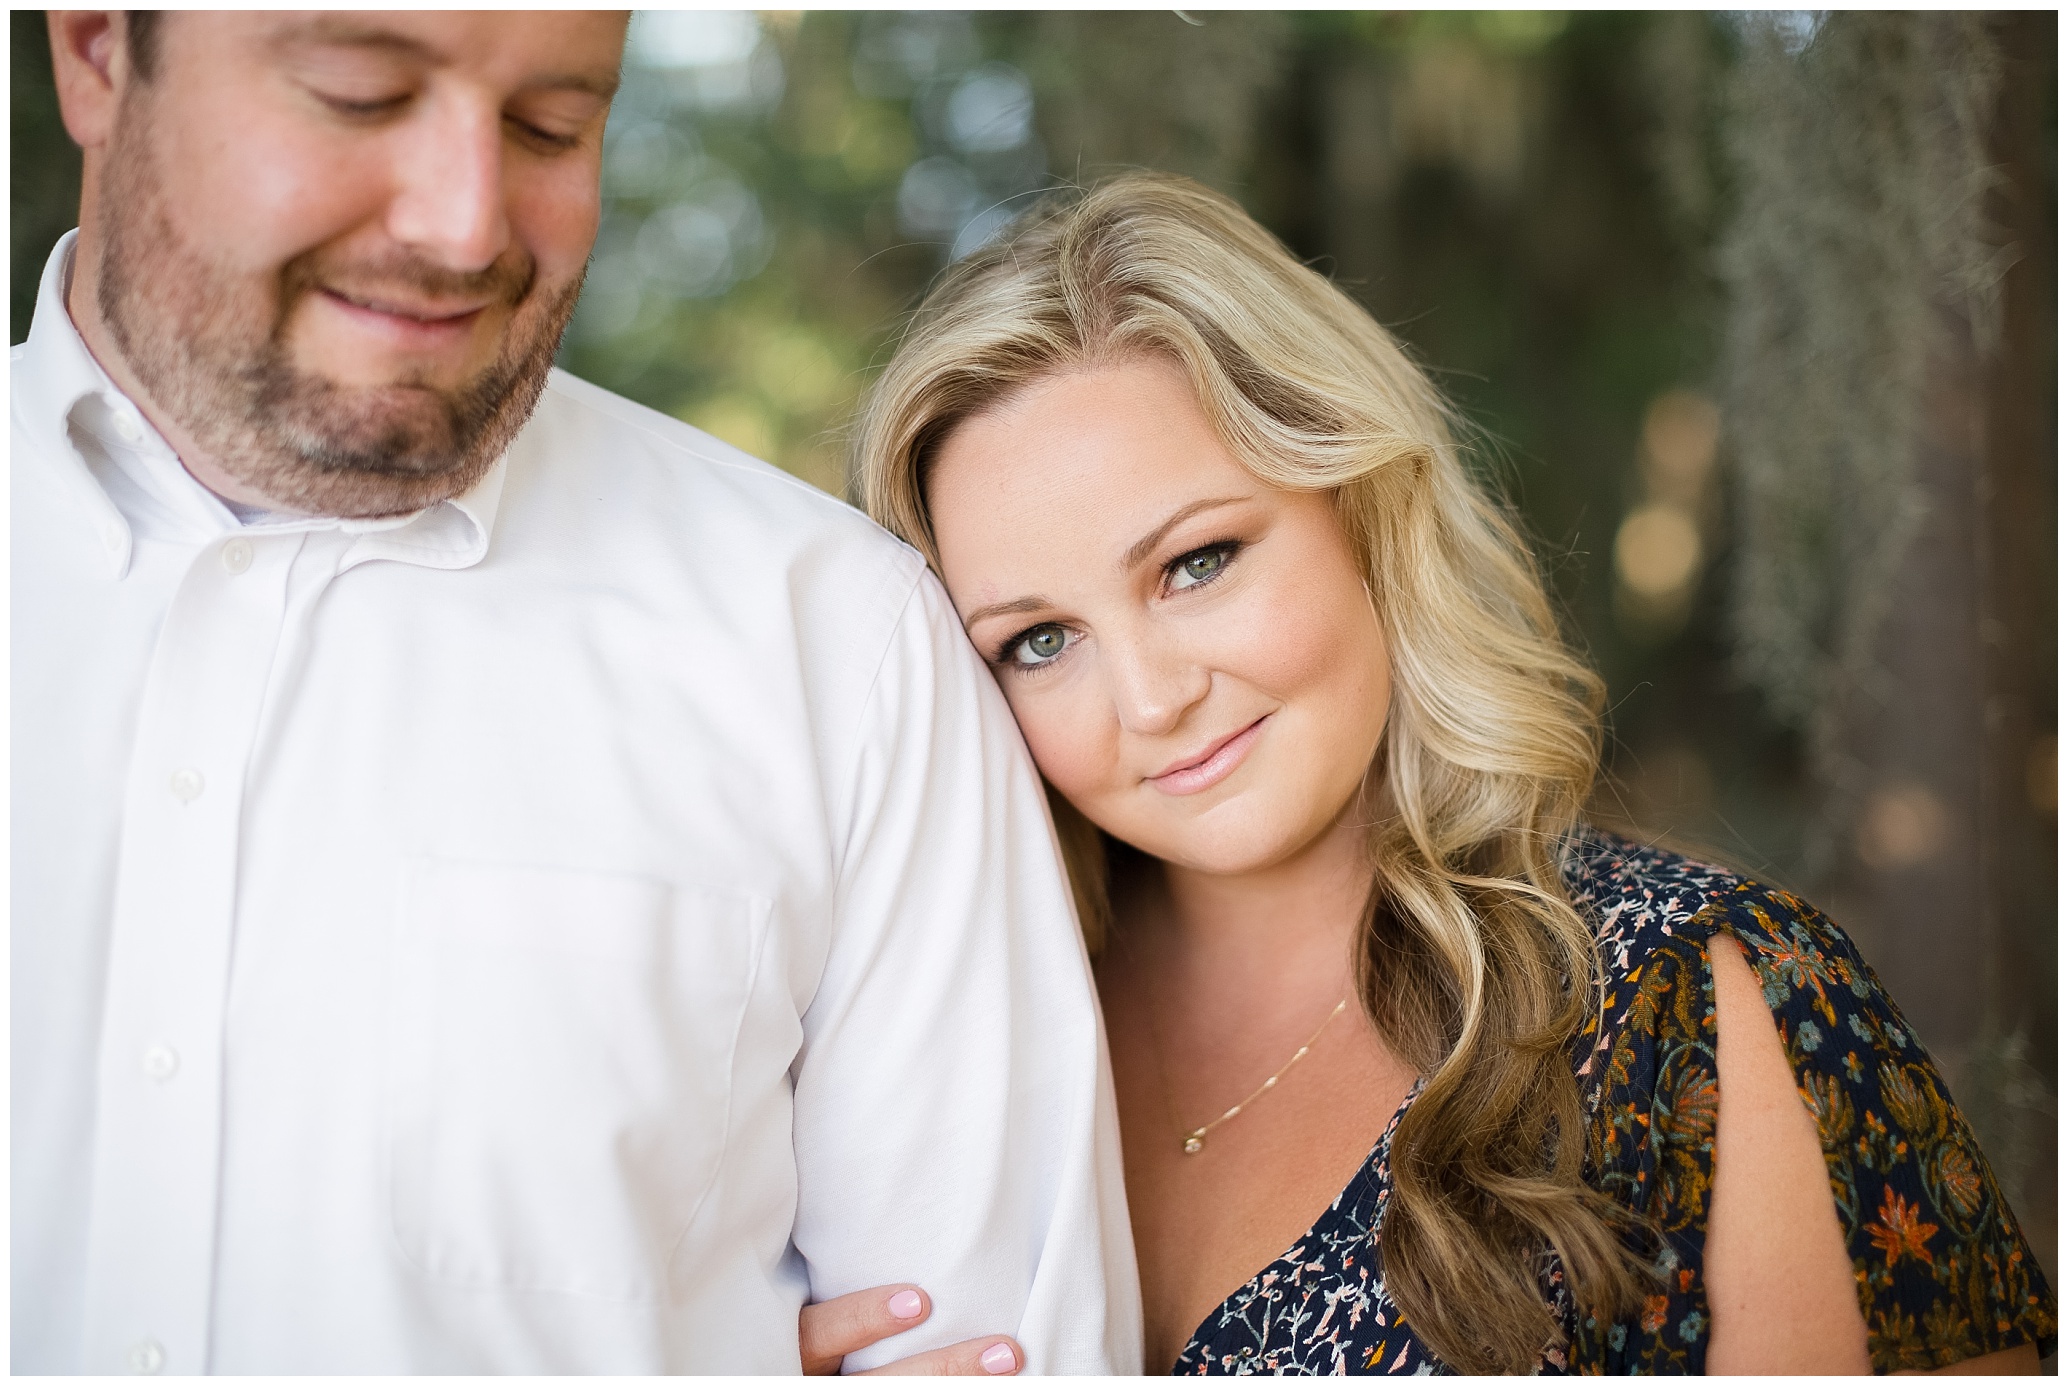 Engagement Photography Virginia Beach. First Landing State Park Luke and Ashley Photography 